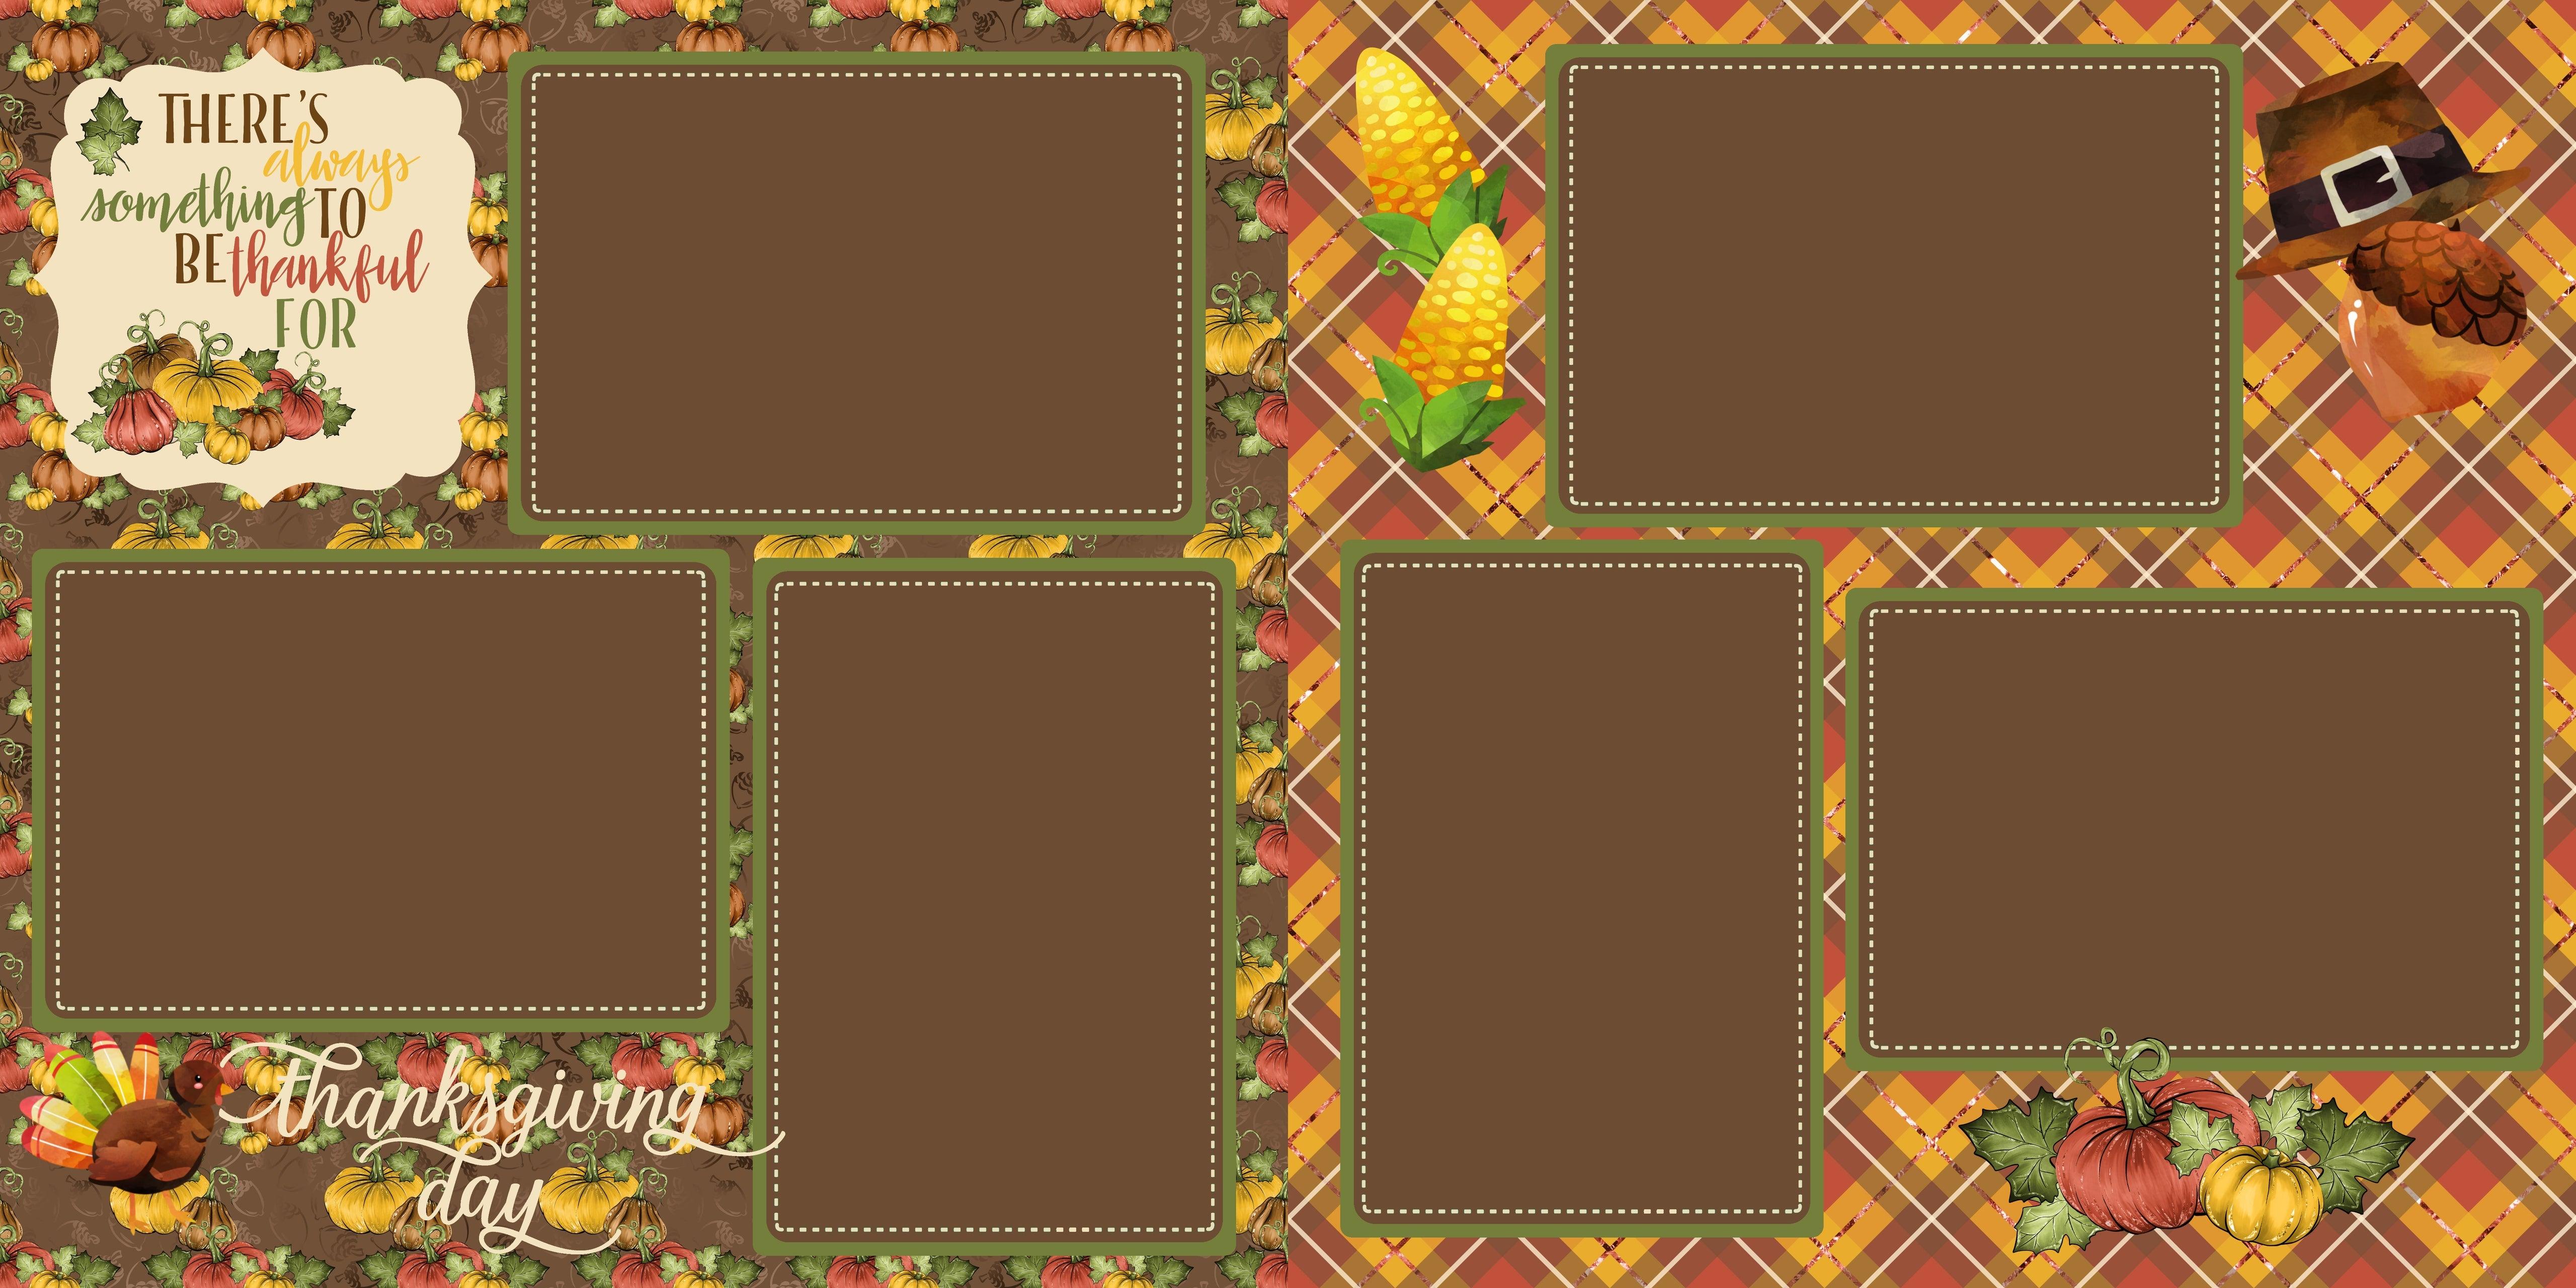 Always Something To Be Thankful For Thanksgiving (2) - 12 x 12 Premade, Printed Scrapbook Pages by SSC Designs